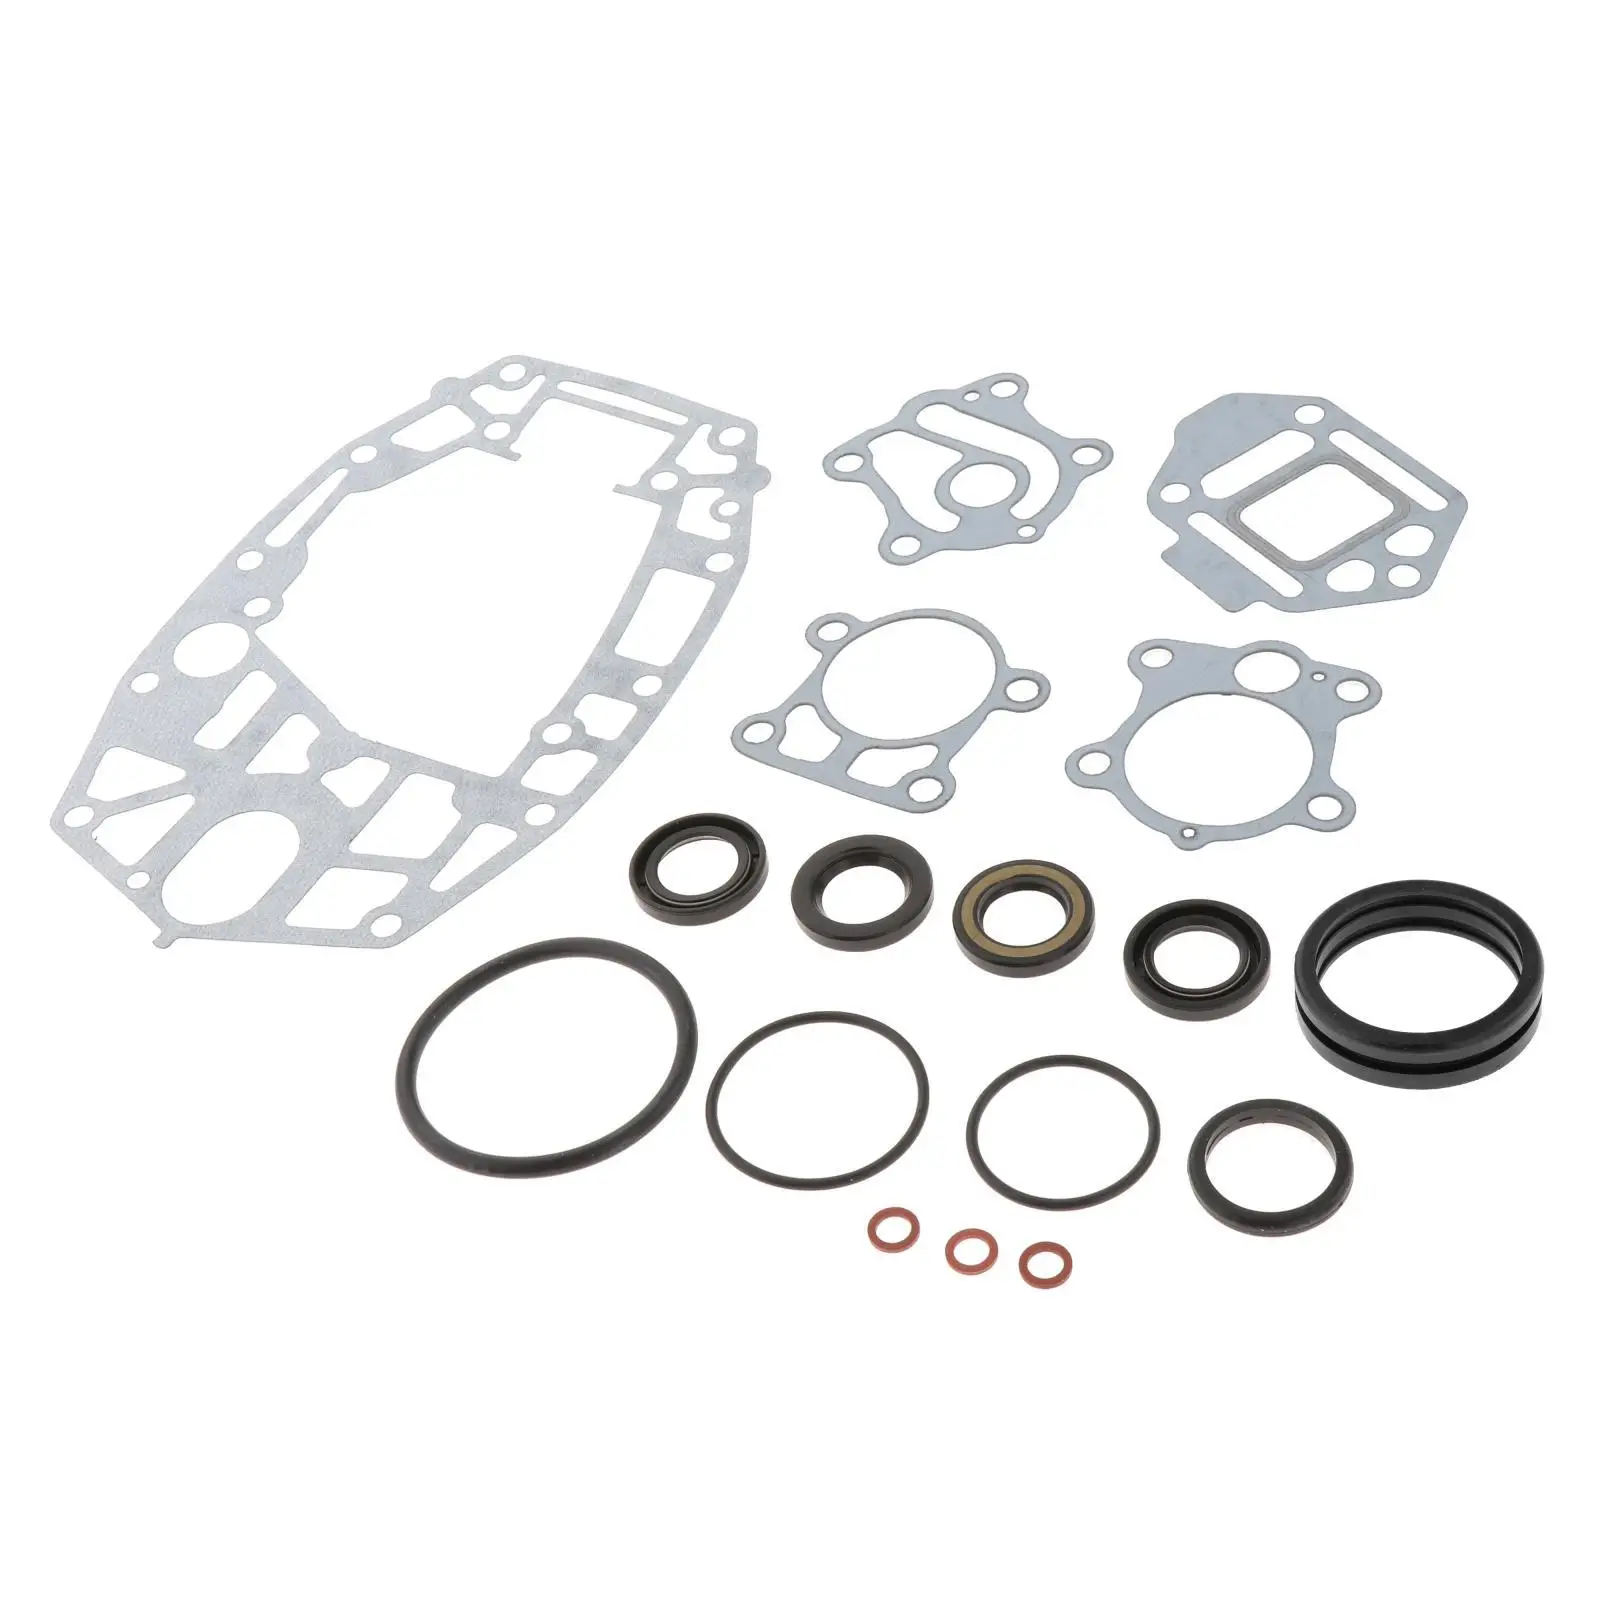 6H4-W0001-20-00 Lower Unit Seal, Gasket Gearcase 18-2792 6H4-W0001  Outboard Motor 3Cylinder Oil Seal